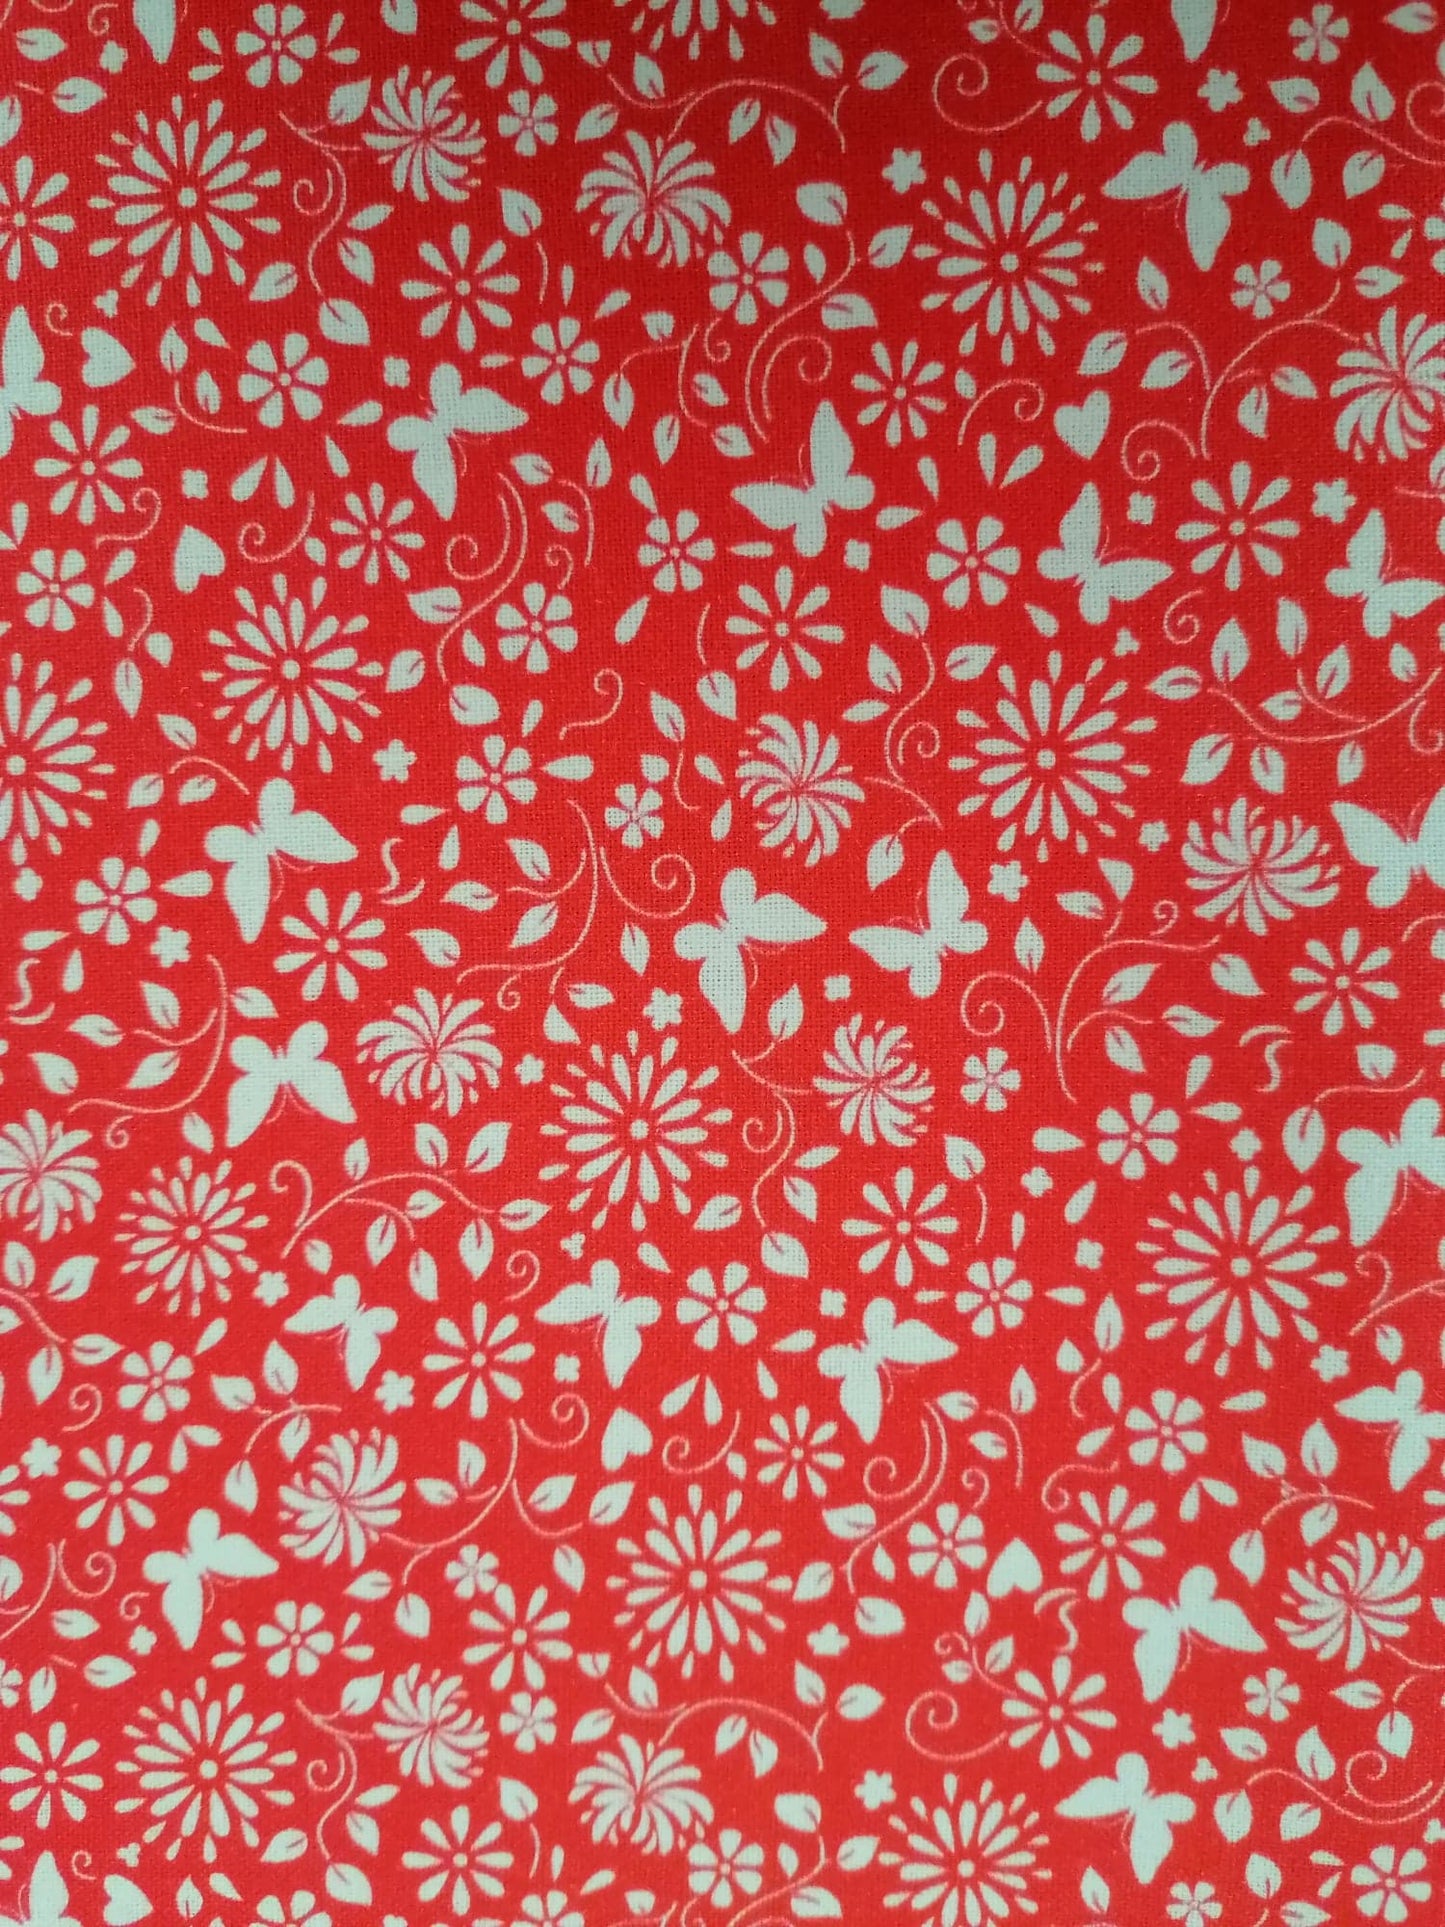 100% Cotton - Crafting & Quilting - Butterflies - Red/White - 44" Wide - Sold By the Metre